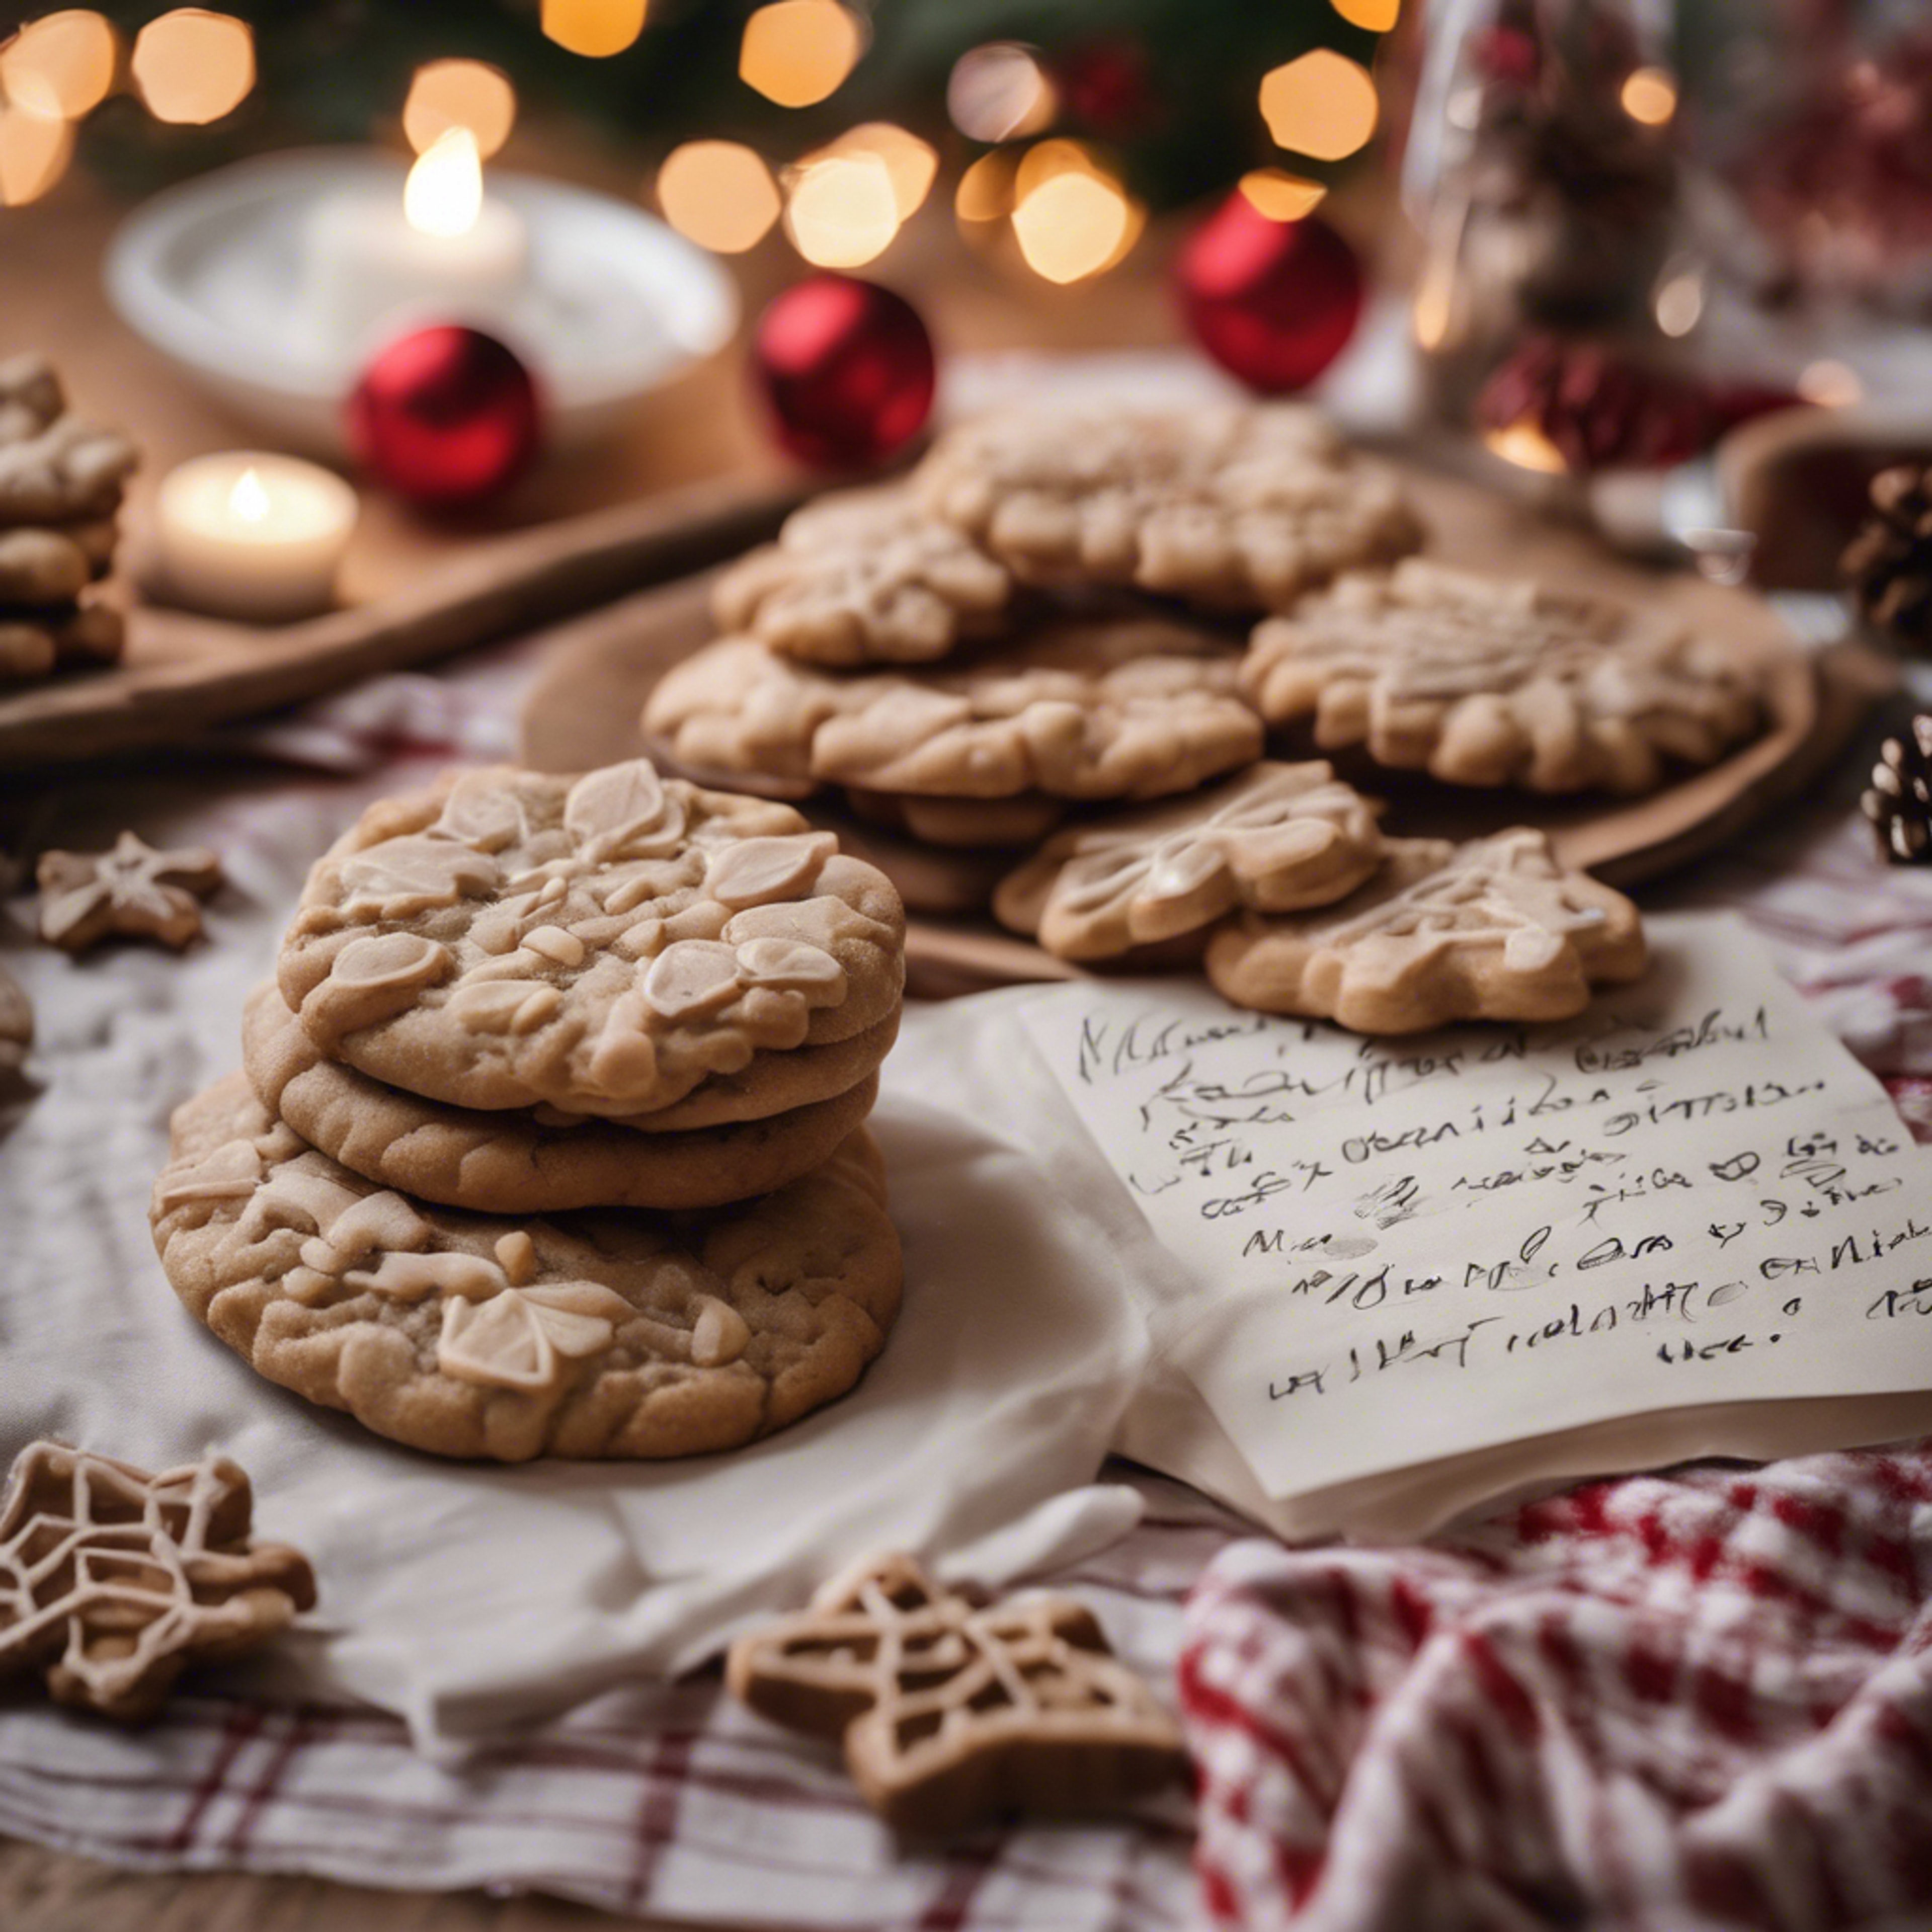 A spread of cozy, homemade Christmas cookies on a festive tablecloth, a glass of milk, and a note to Santa. Обои[2a748ec29b0a47b6b2f7]